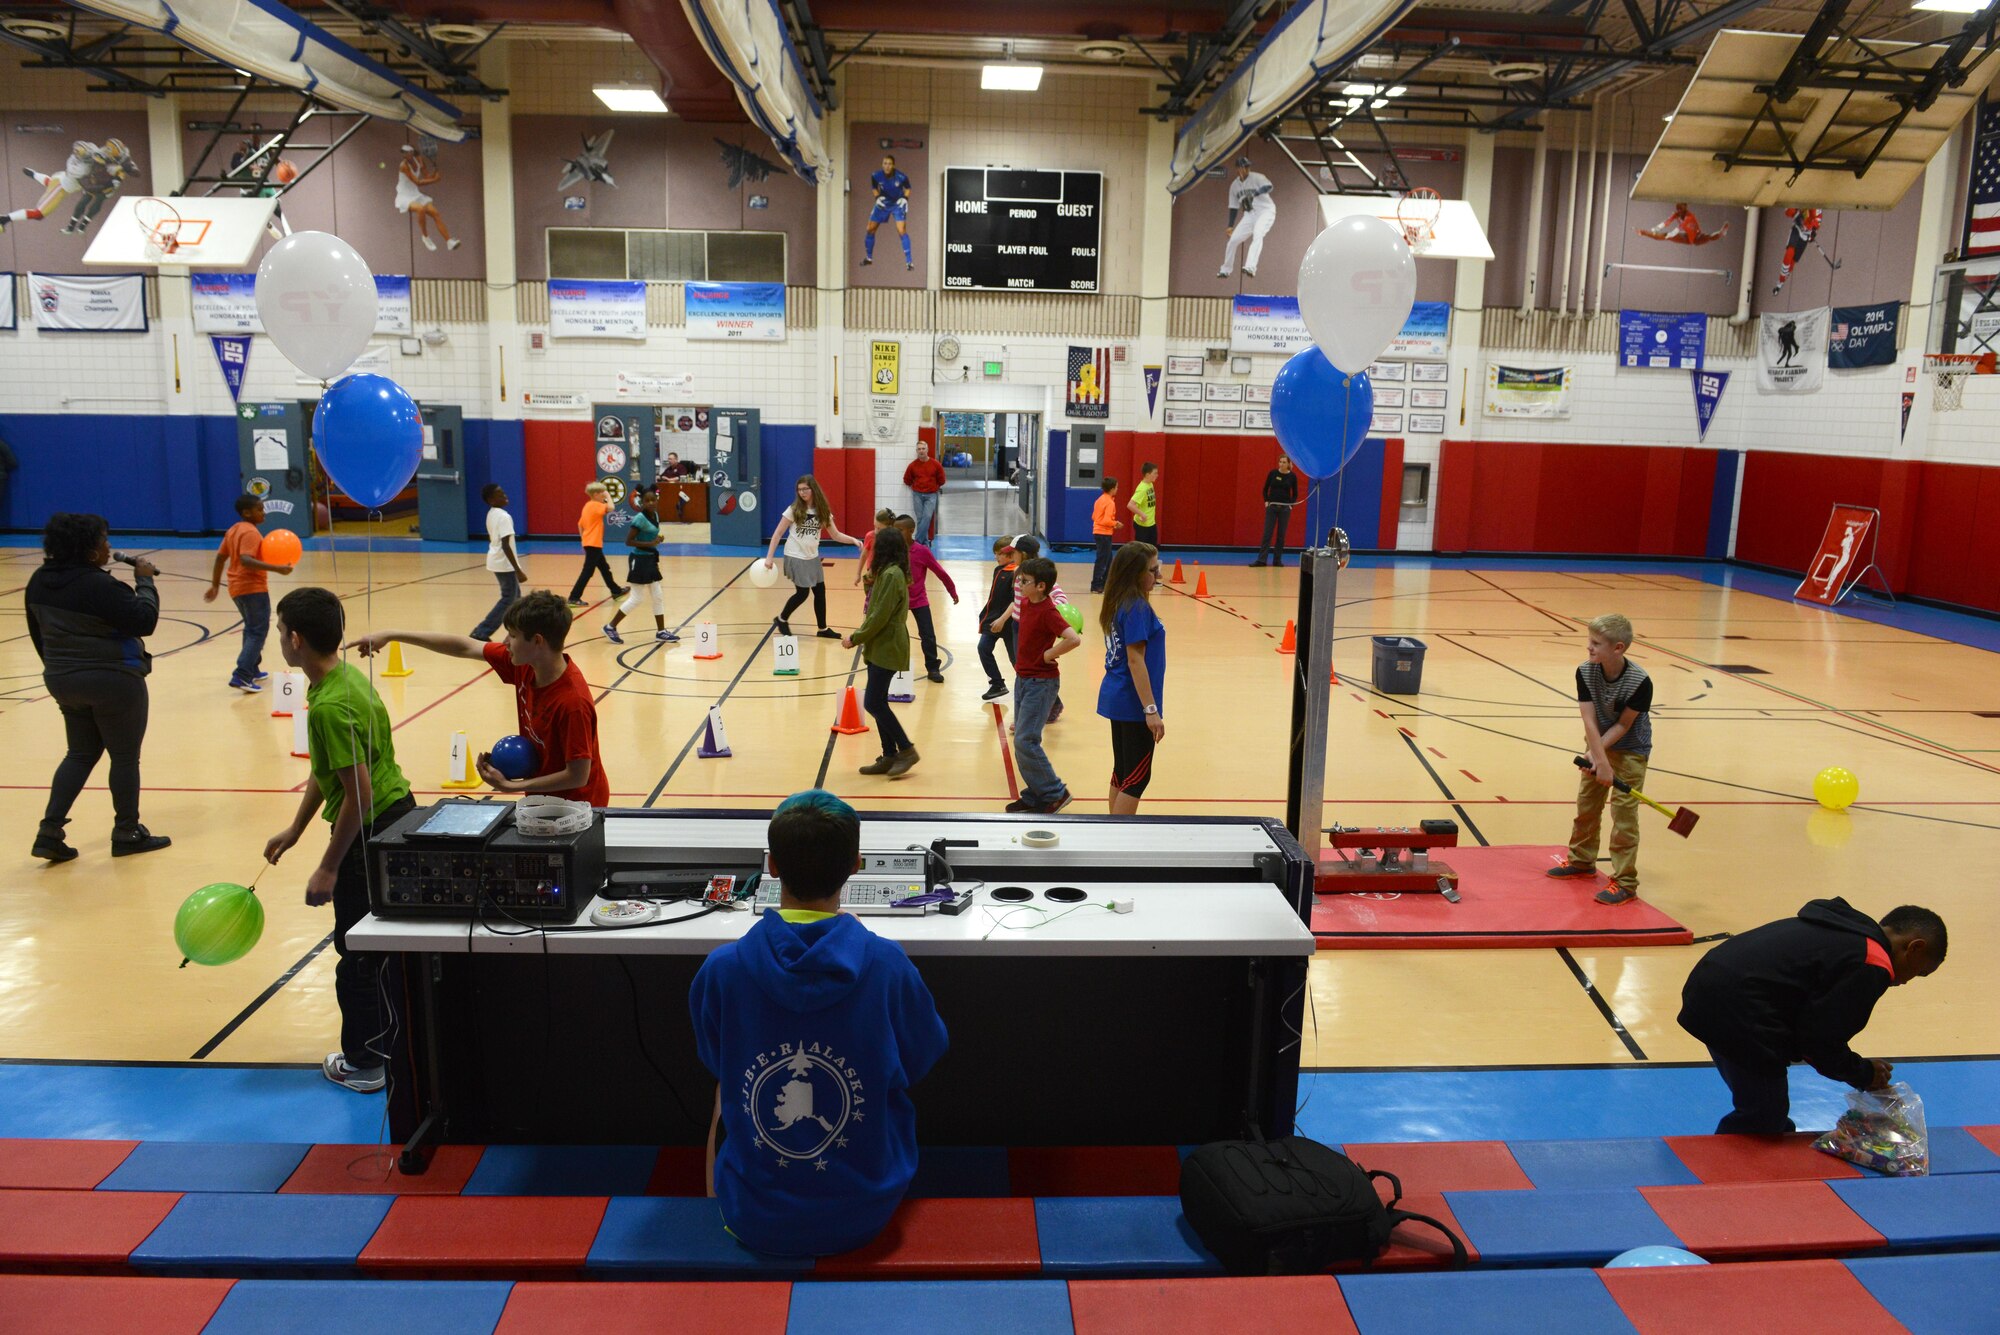 Children play various games during the Worldwide Day of Play at the Kennecott Youth Center at Joint Base Elmendorf-Richardson, Alaska, Sept. 21, 2016. The Worldwide Day of Play is an annual event that encourages kids and parents to go outside and play instead of sitting indoors and watching television. Due to inclement weather, the Kennecott Youth Center provided several games and stations like the cupcake walk, indoor rock climbing, batting cage, pitching mound and more.